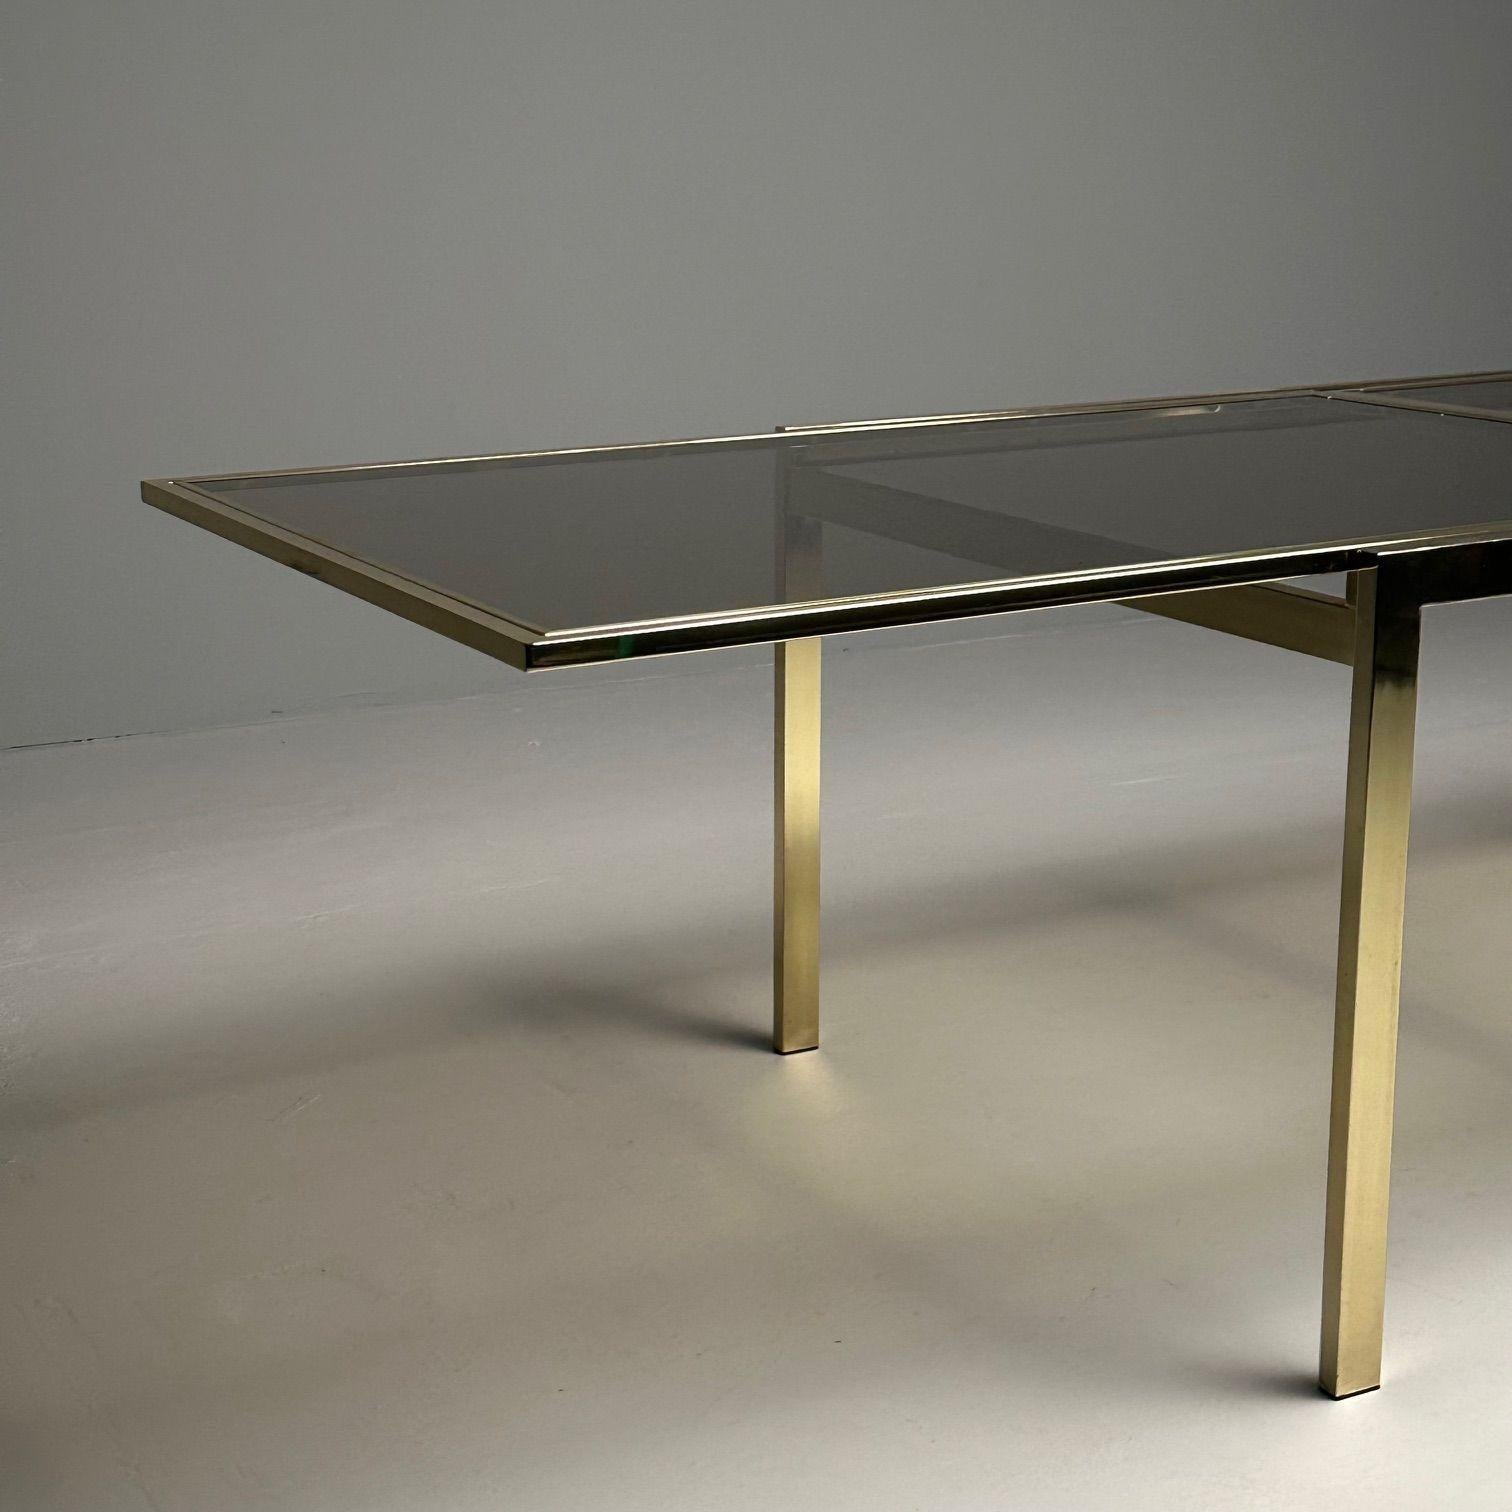 Milo Baughman, DIA, Mid-Century Modern Dining Table, Smoked Glass, Brass, Canada For Sale 5